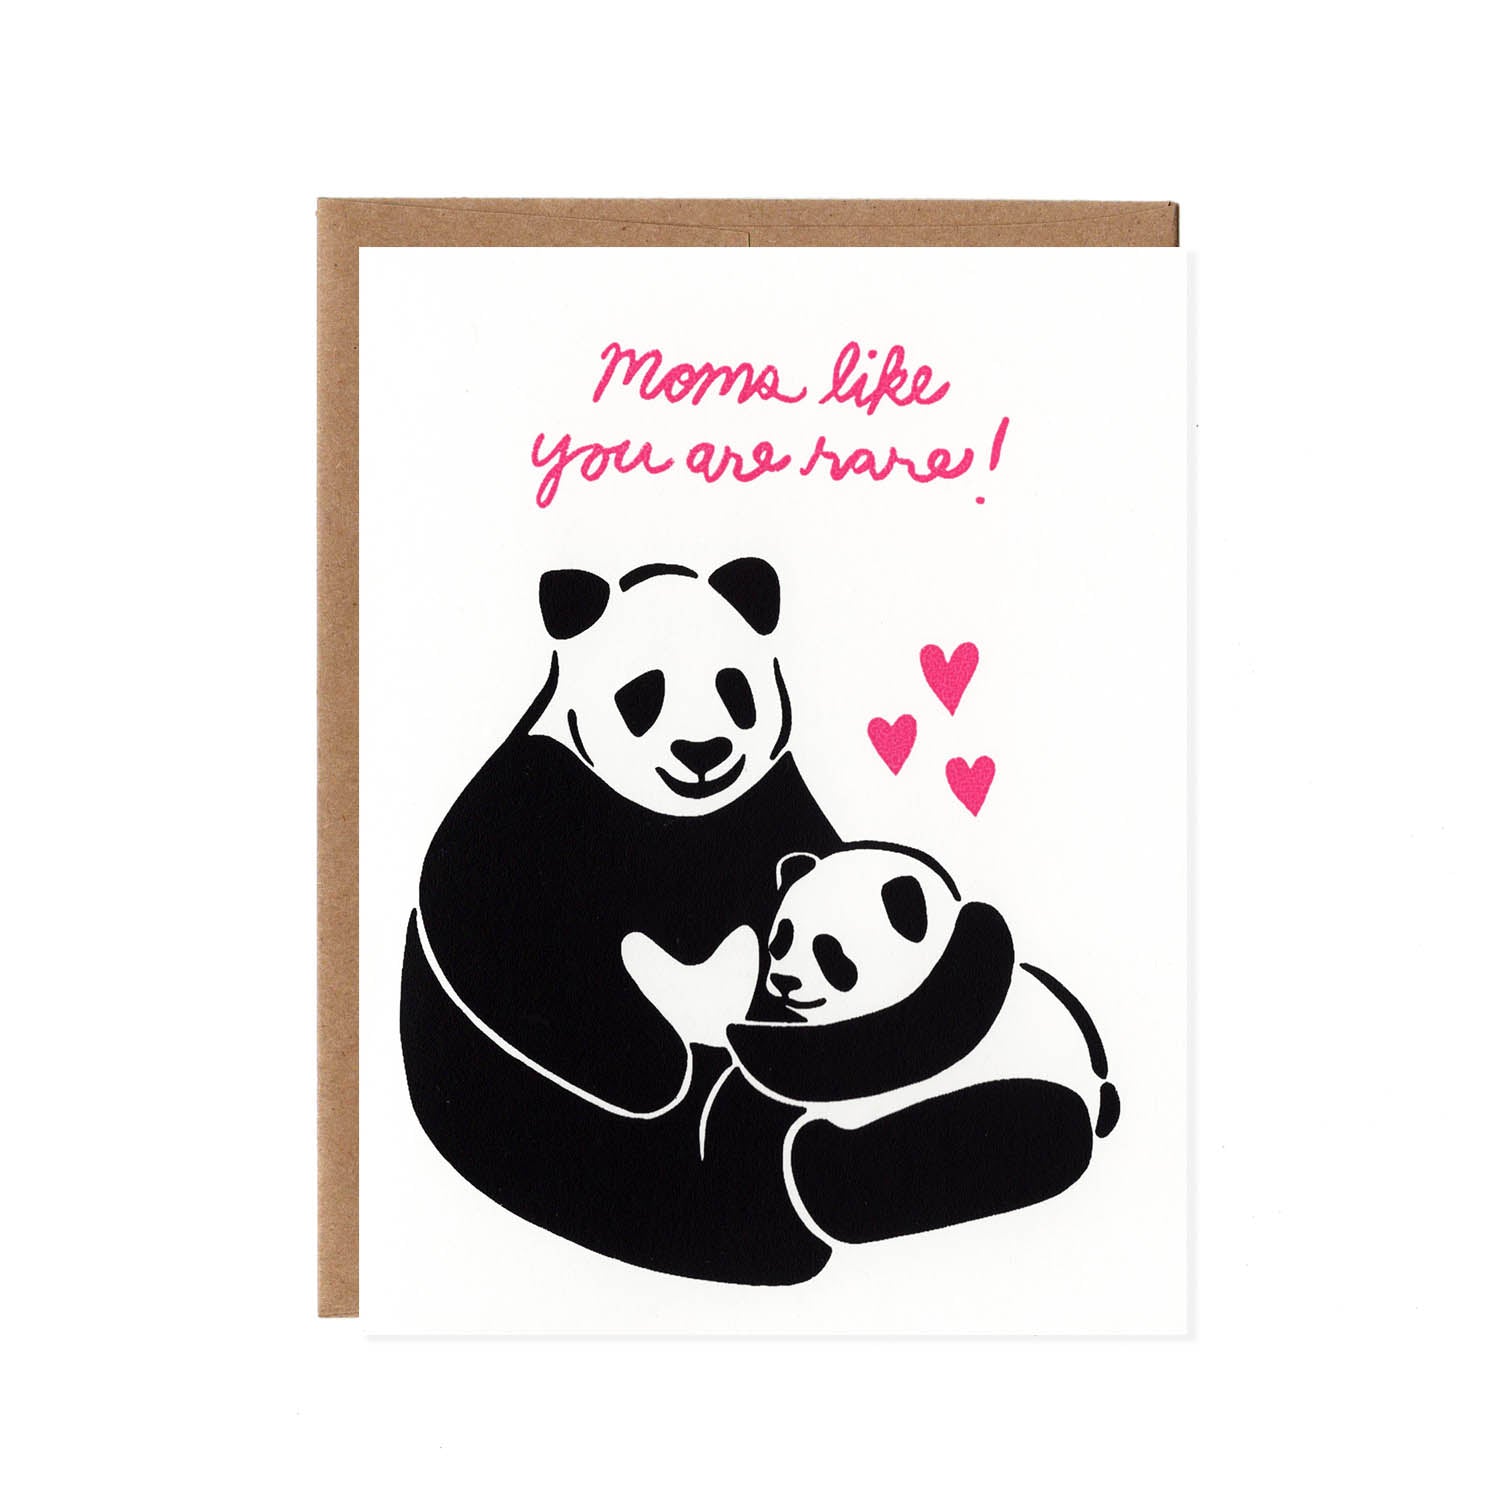 A mama and baby panda snuggle under the pink text "Moms like you are rare!" in a cursive font.